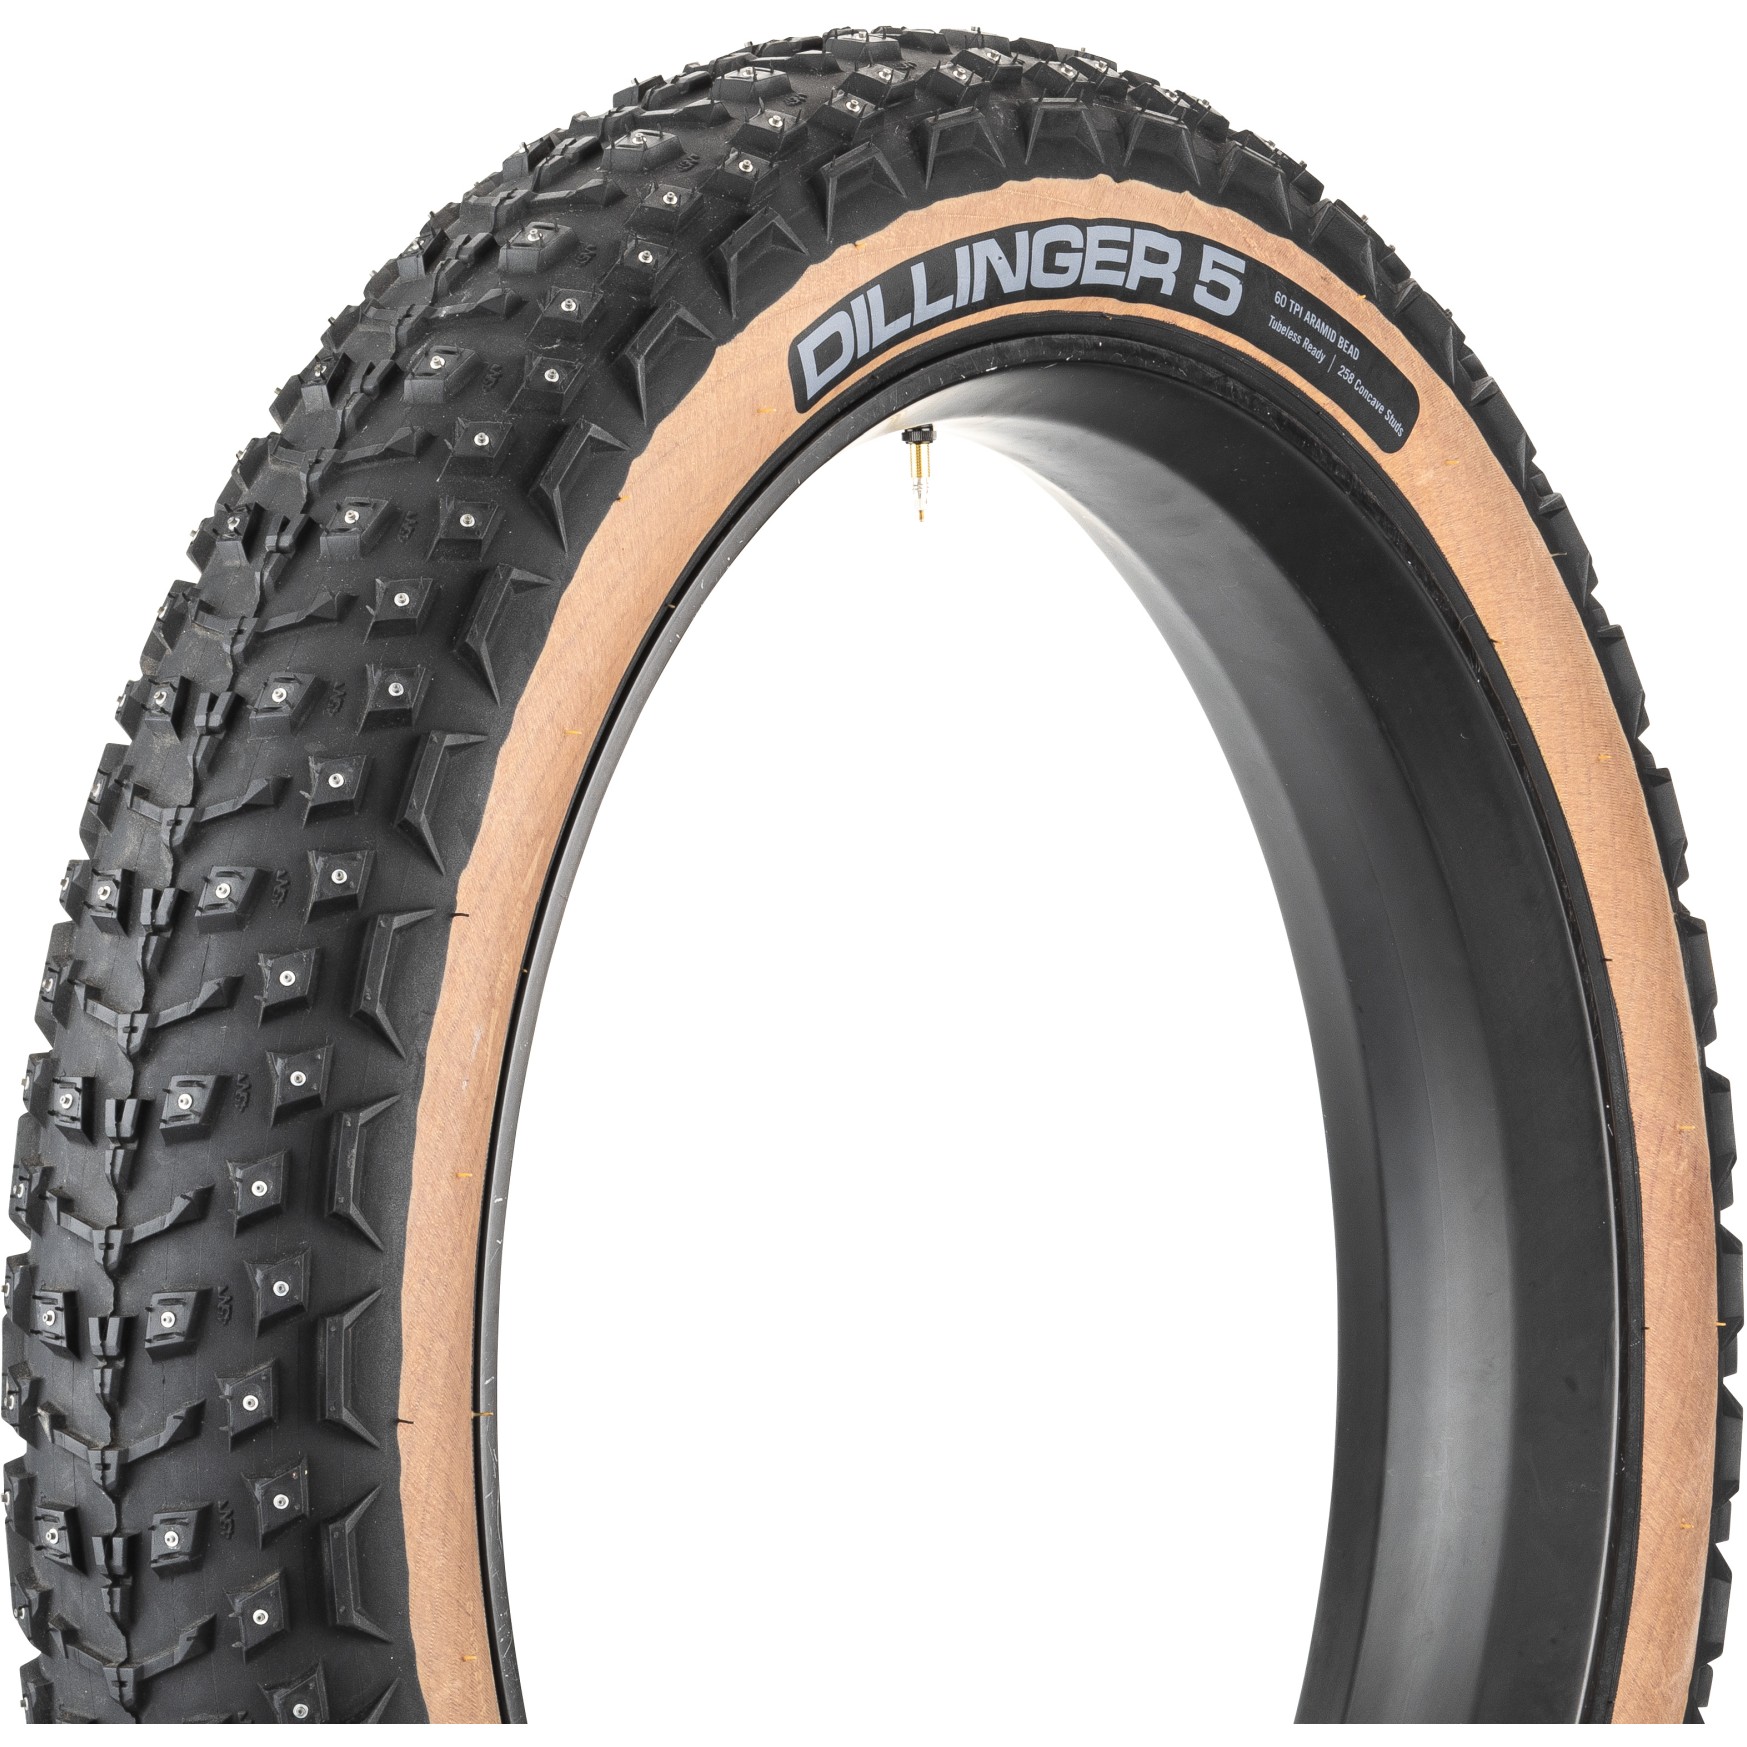 Picture of 45NRTH Dillinger 5 Fatbike Folding Tire | Skinwall | Tubeless Ready - 26x4.60&quot; / 258 Studs / 60TPI